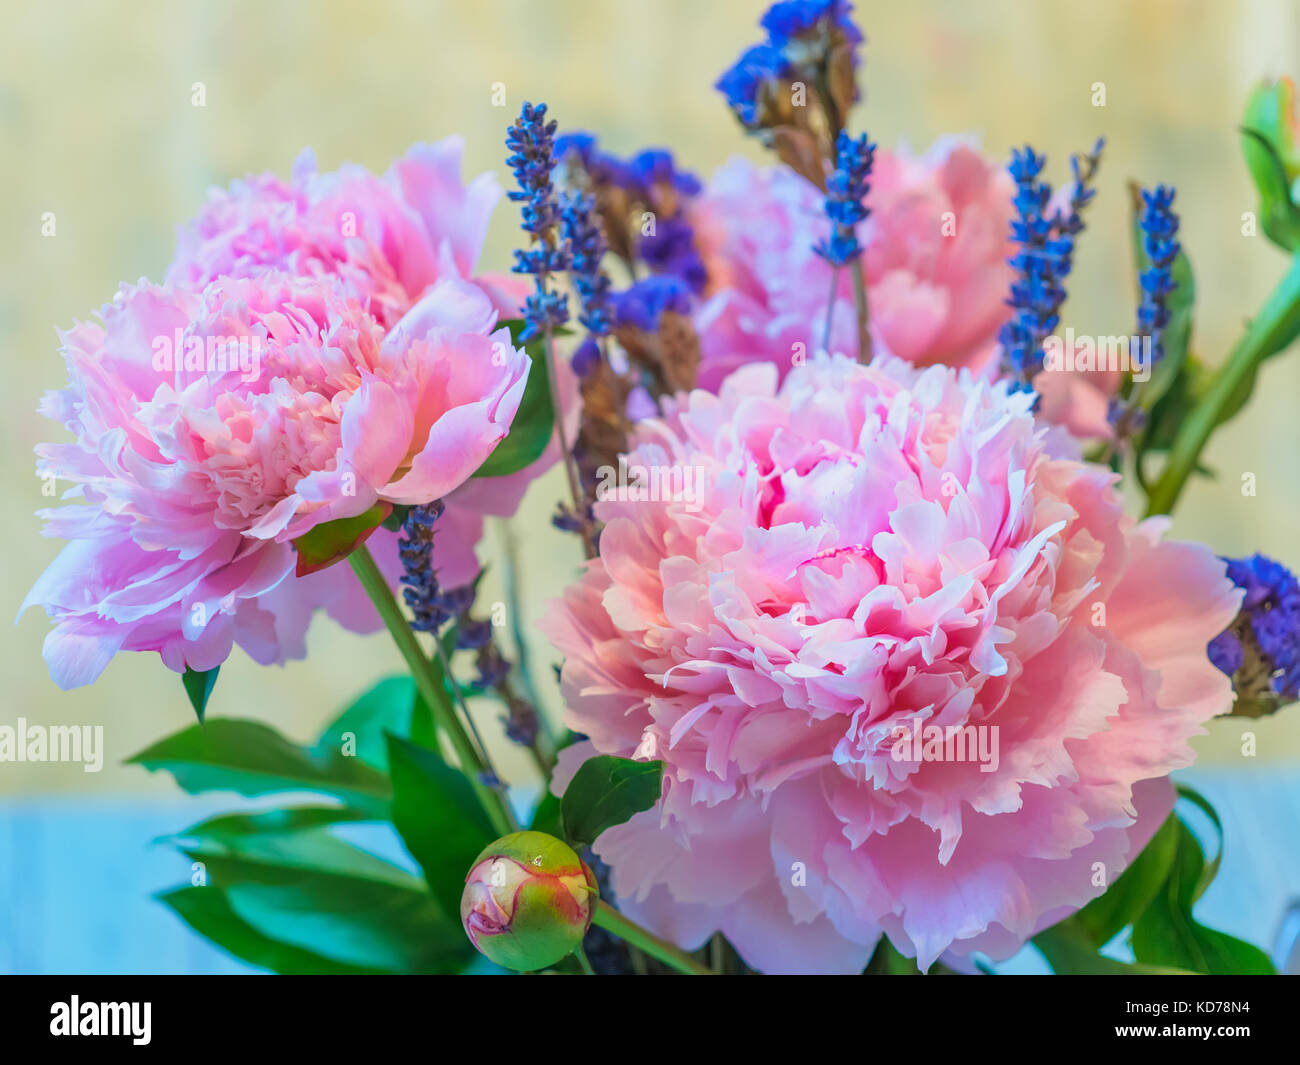 A bouquet of beautiful pink peony and lavender flowers against blurred background. Stock Photo